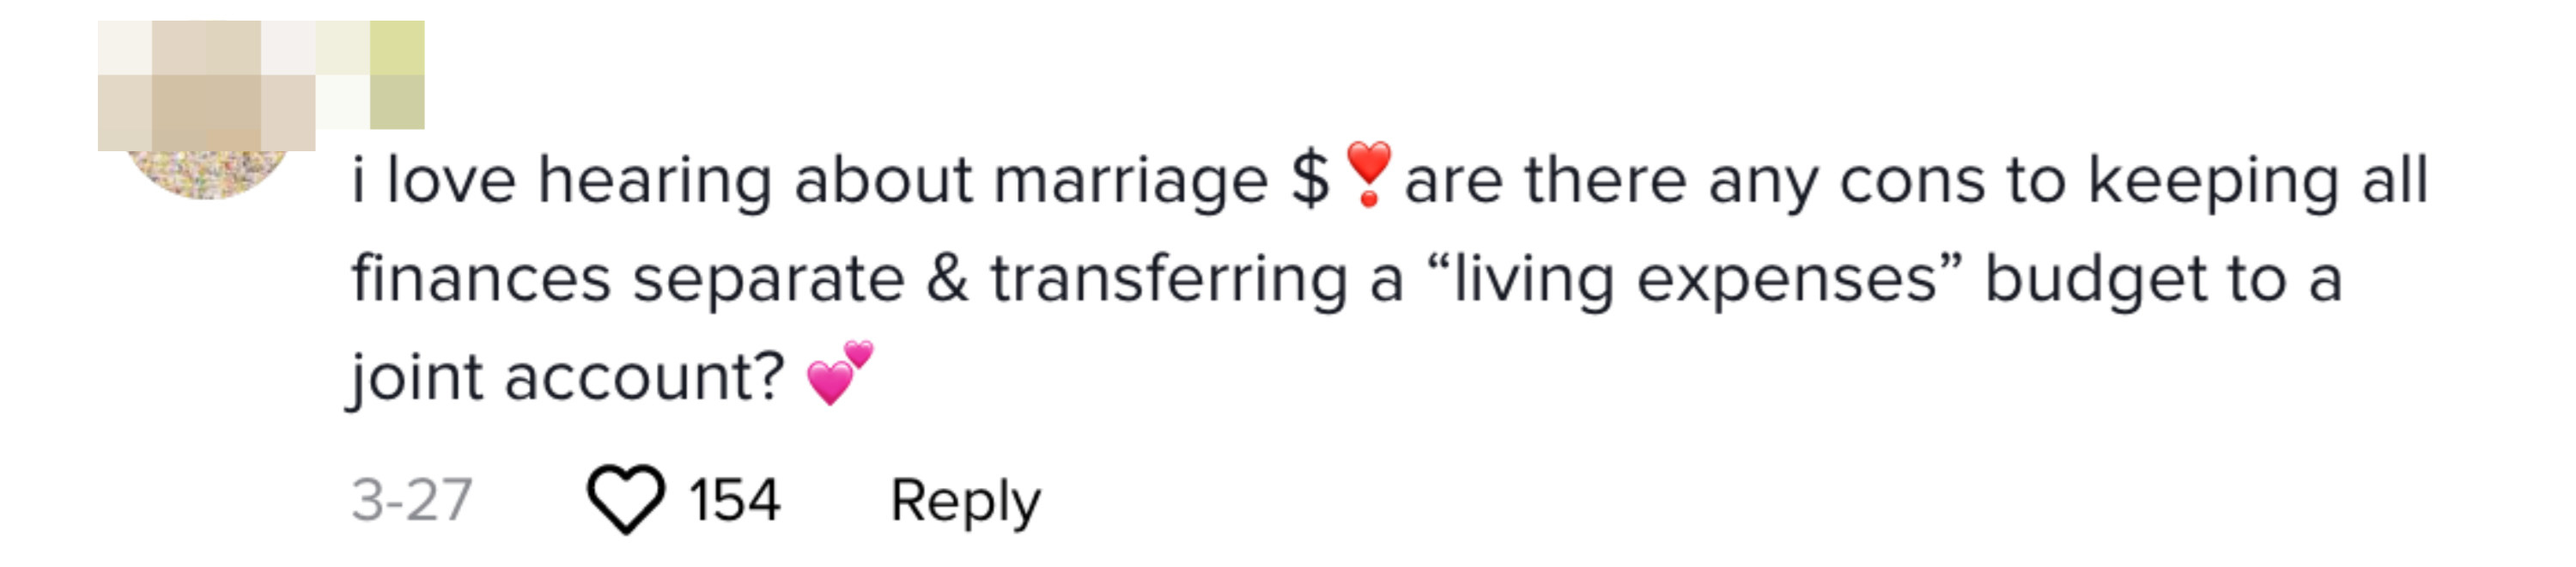 TikTok comment stating, &quot;I love hearing about marriage $ are there any cons to keeping all finances separate &amp; transferring a &quot;living expenses&quot; budget to a joint account?&quot;